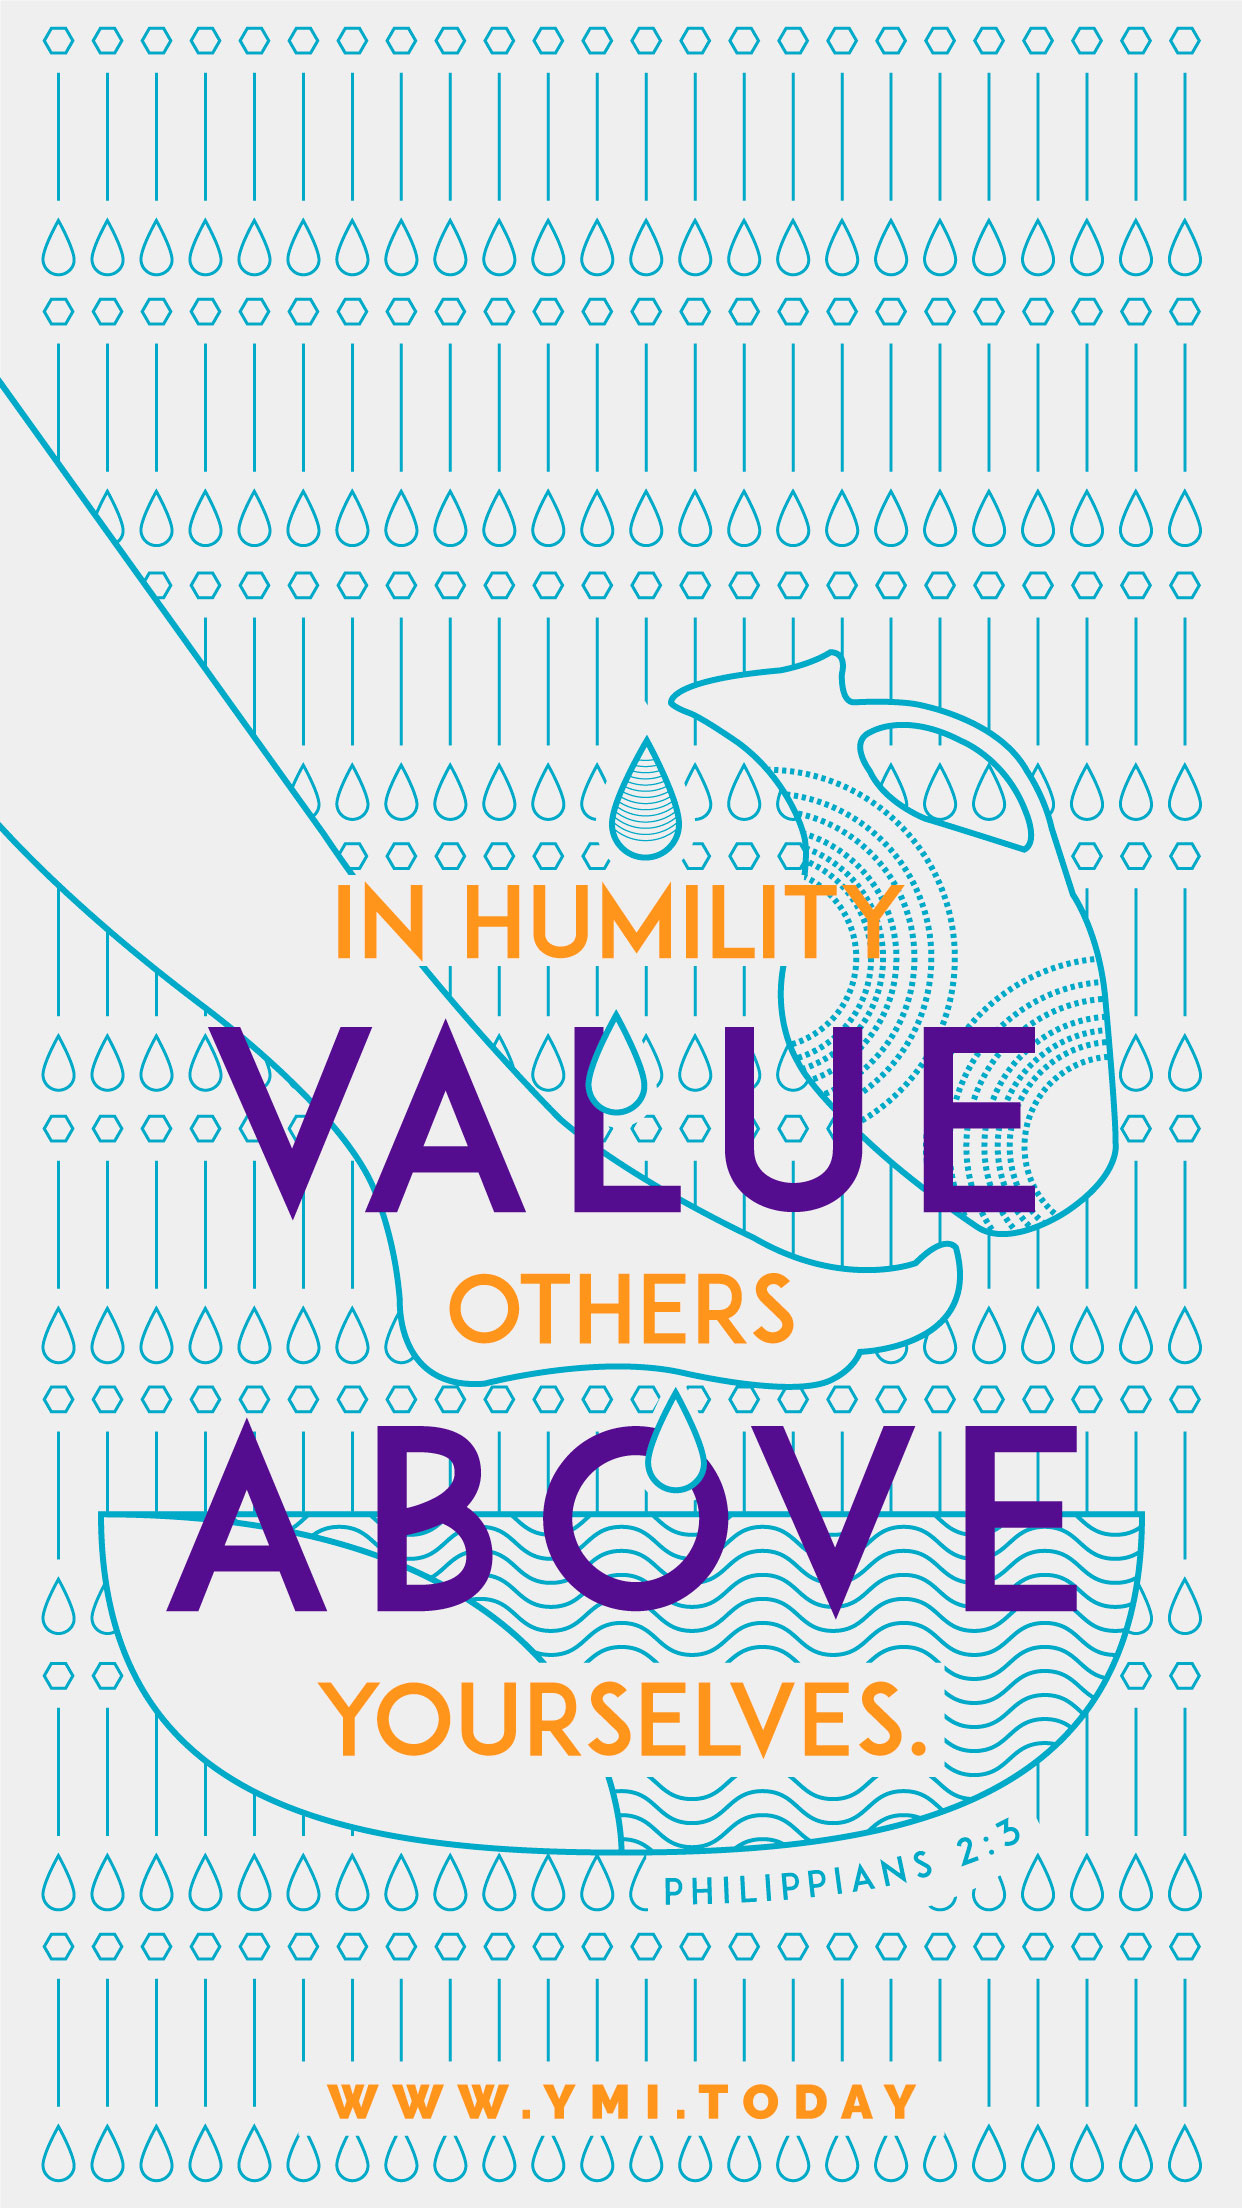 YMI March 2016 Phone Lockscreen - In humility, value others above yourselves. - Philippians 2:3